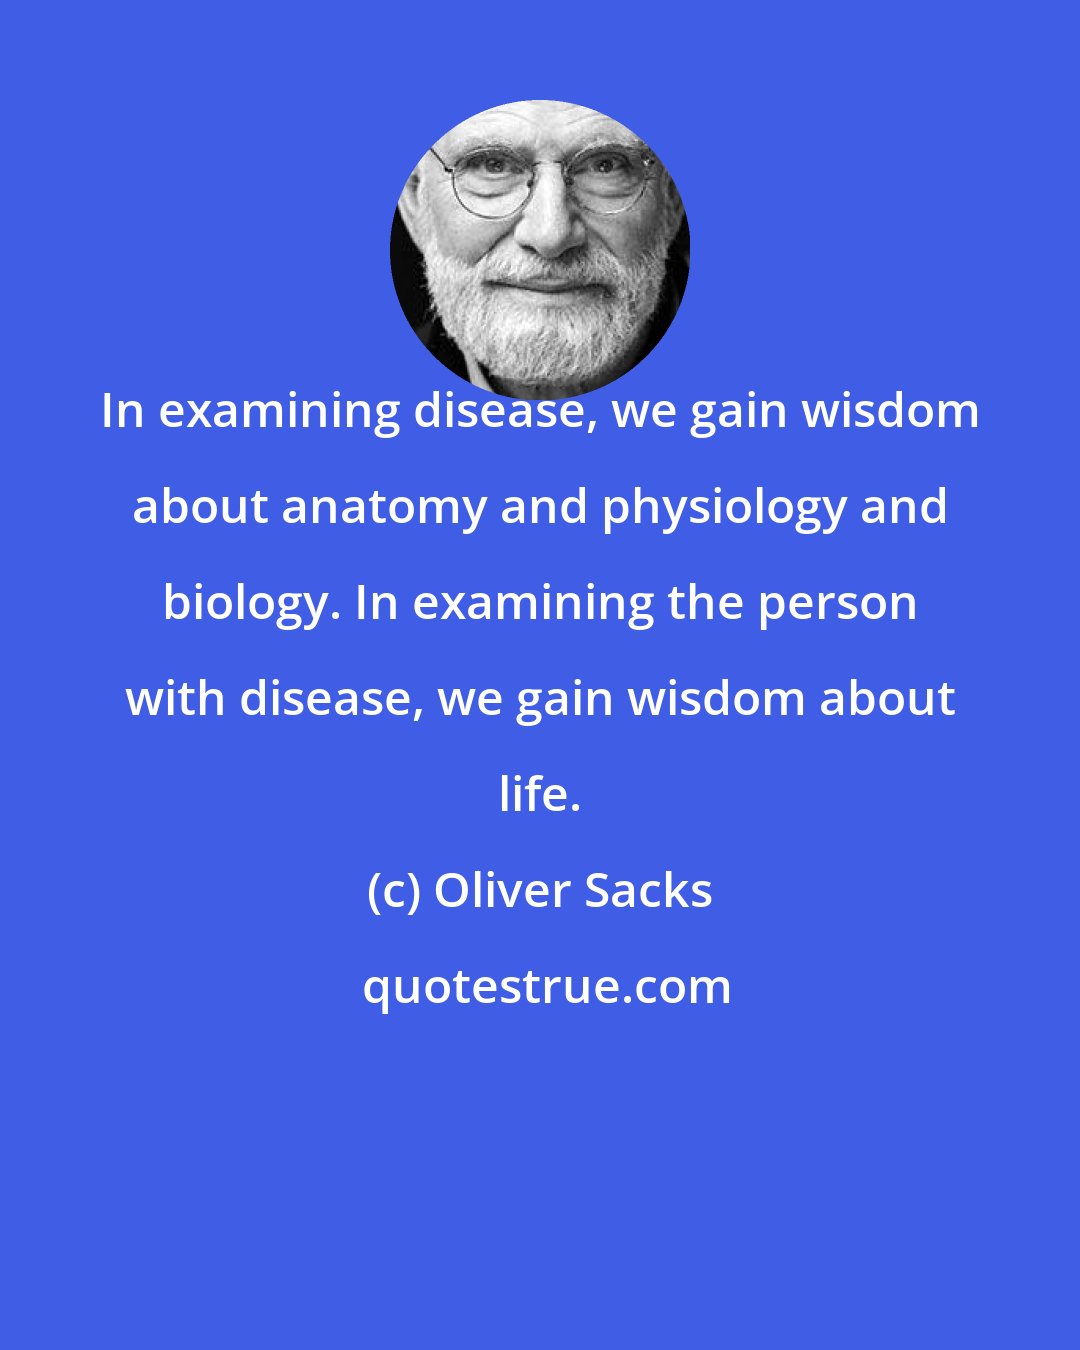 Oliver Sacks: In examining disease, we gain wisdom about anatomy and physiology and biology. In examining the person with disease, we gain wisdom about life.